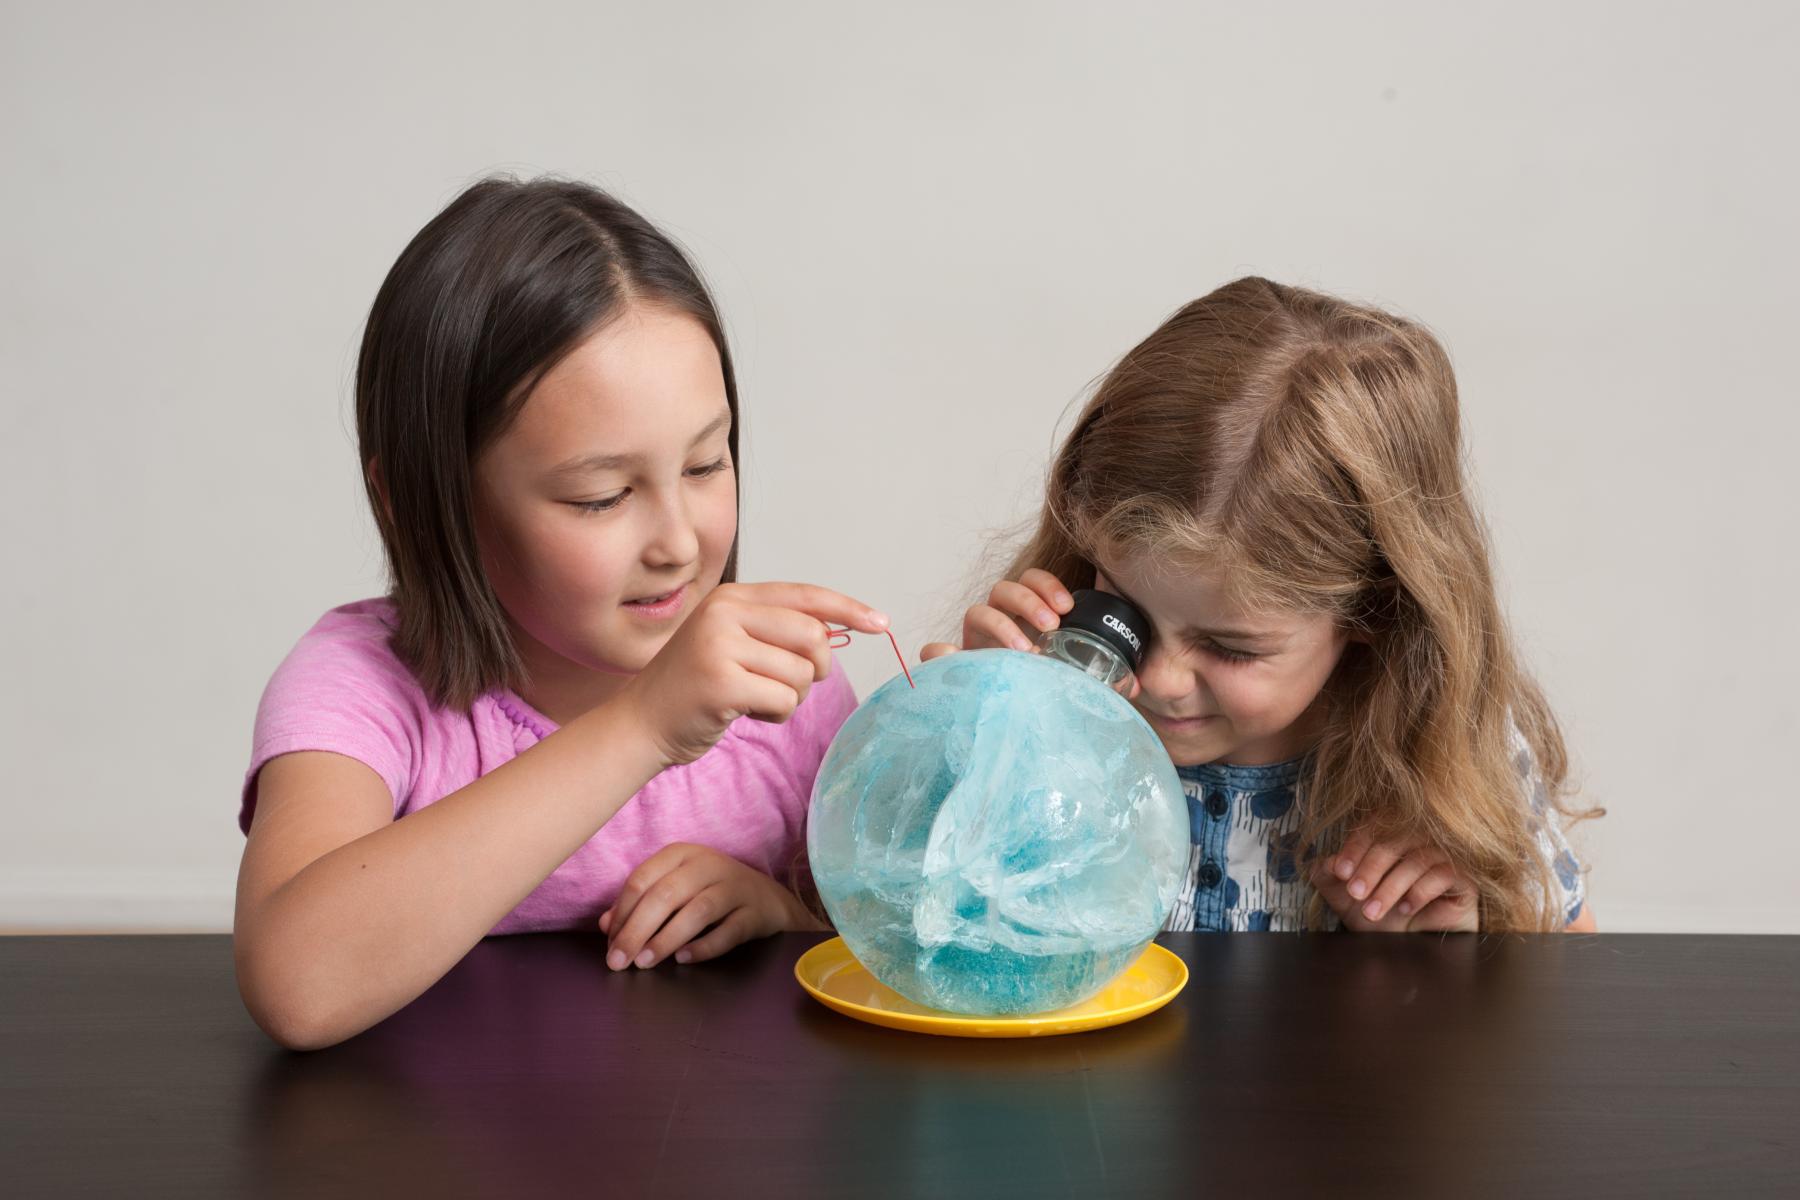 Learners examine a large sphere of ice with a magnifying glass and paperclip